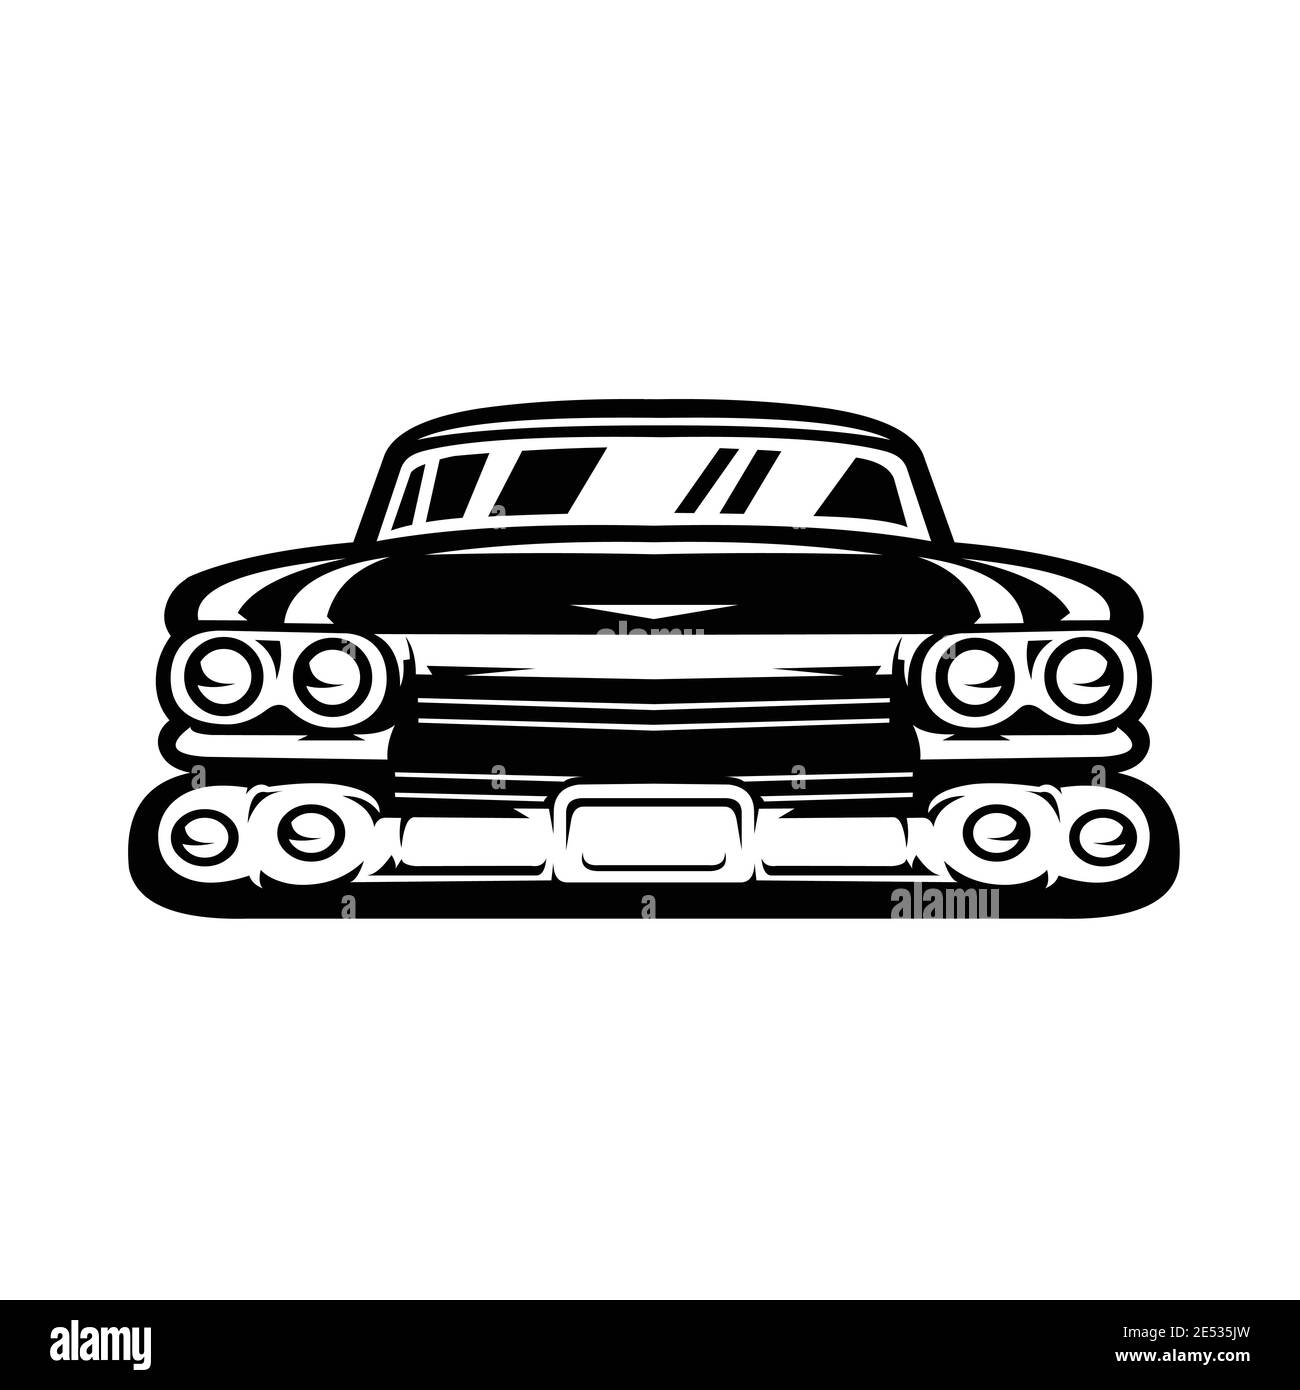 Silhouette of retro classic car front view vector illustration isolated ...